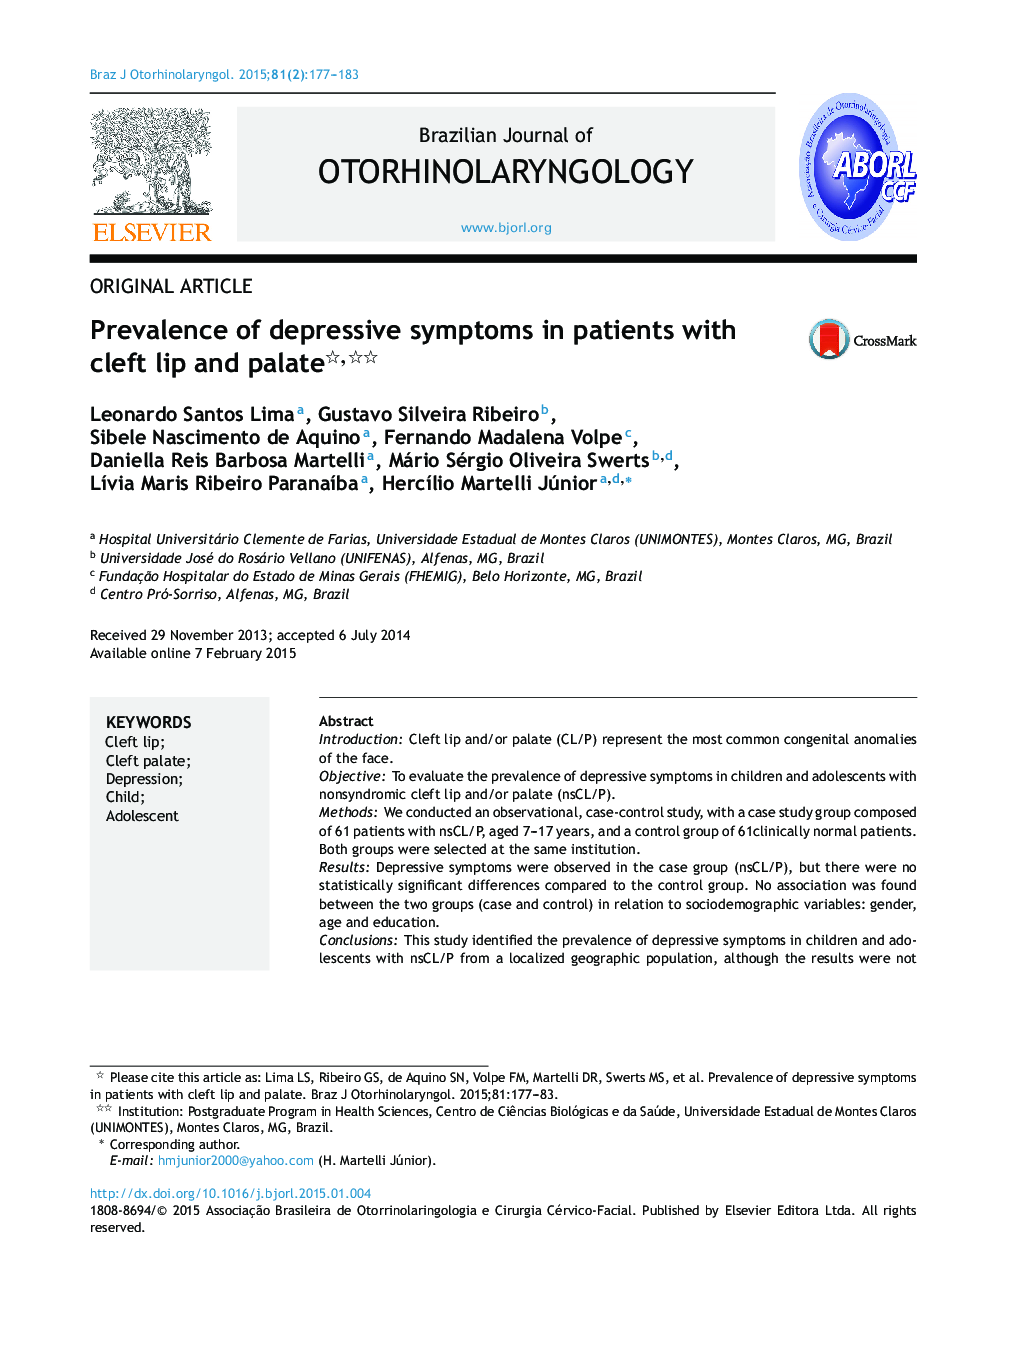 Prevalence of depressive symptoms in patients with cleft lip and palate 